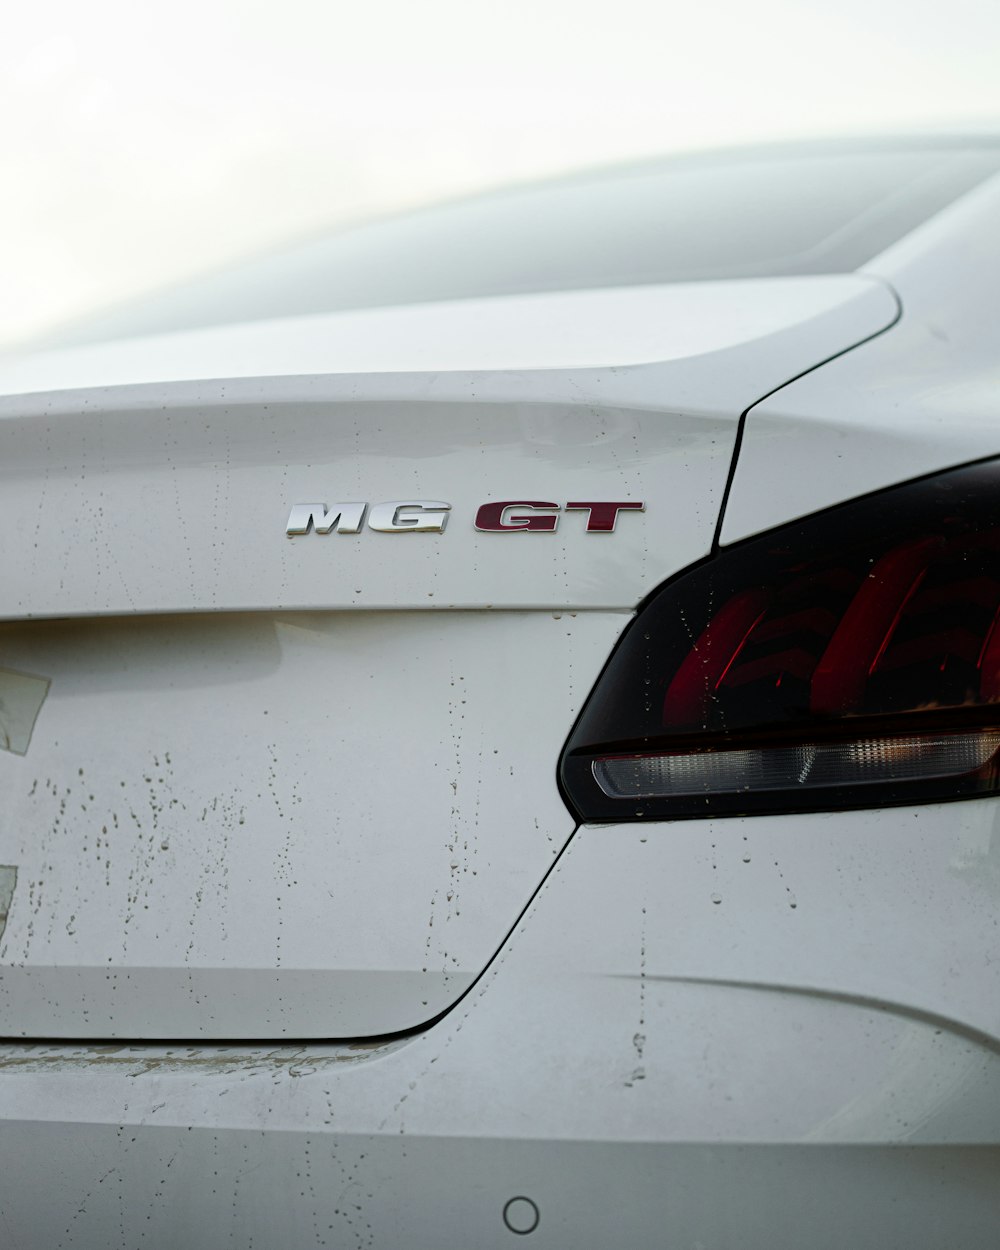 a close up of the tail end of a white car